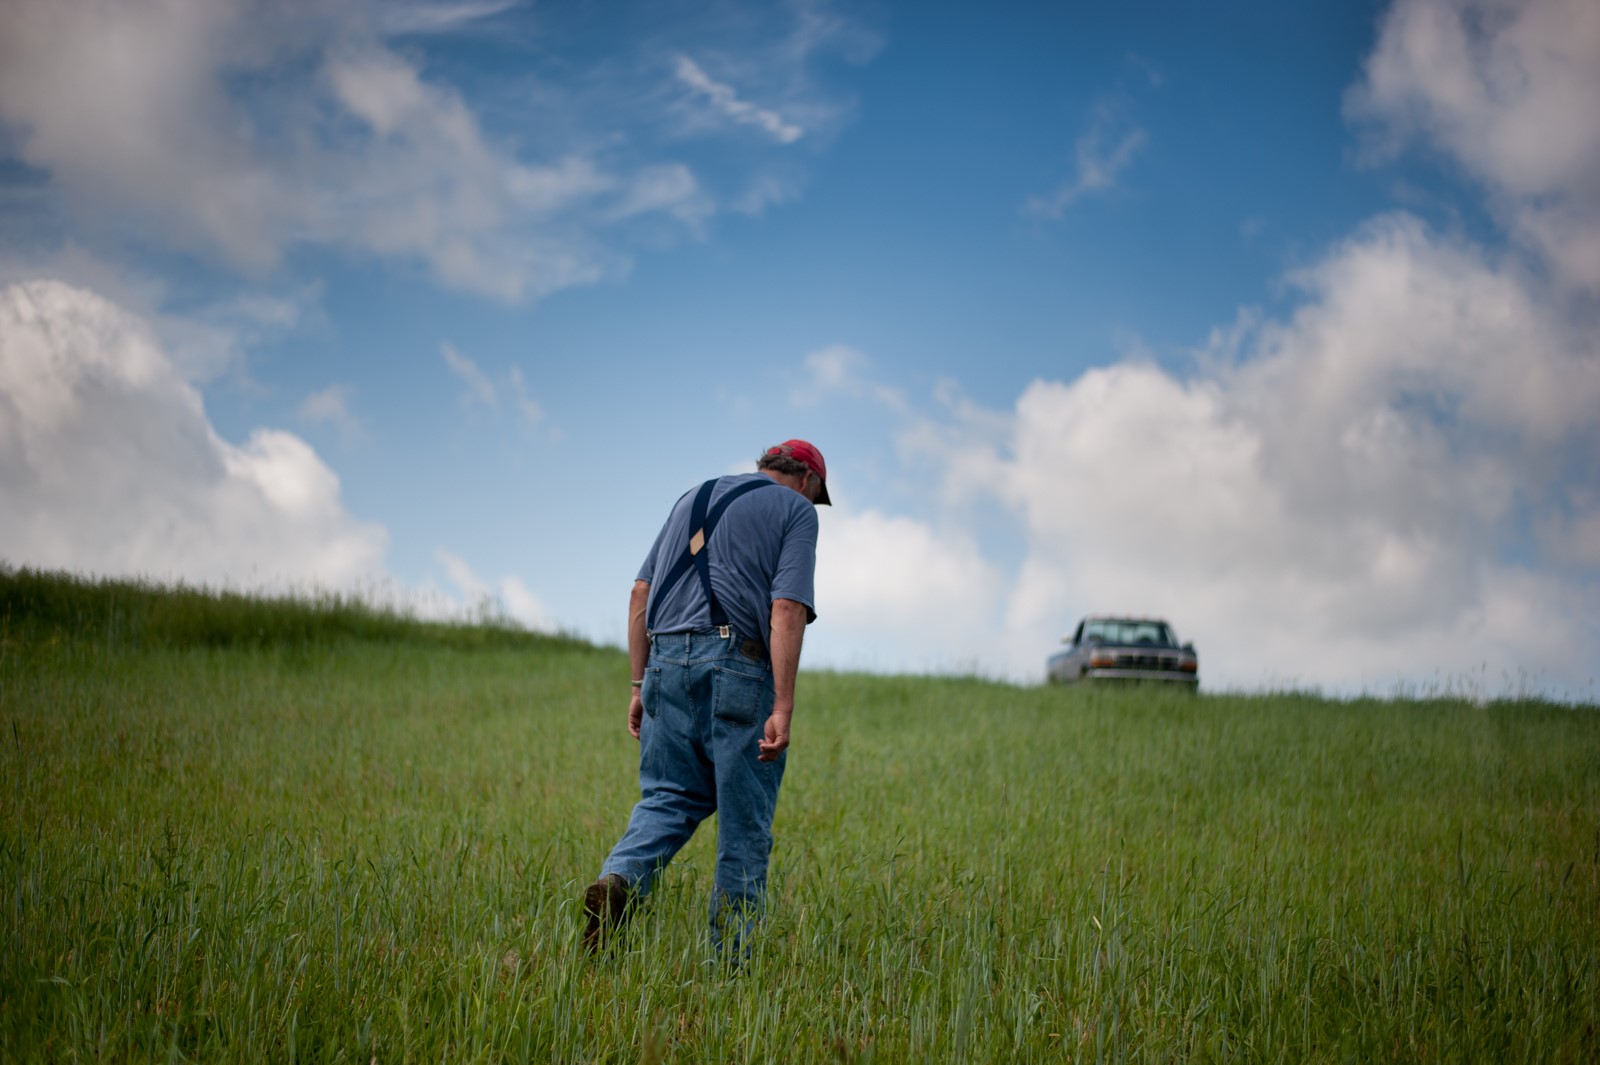 An older man in overalls walks through a grass field back to his truck.